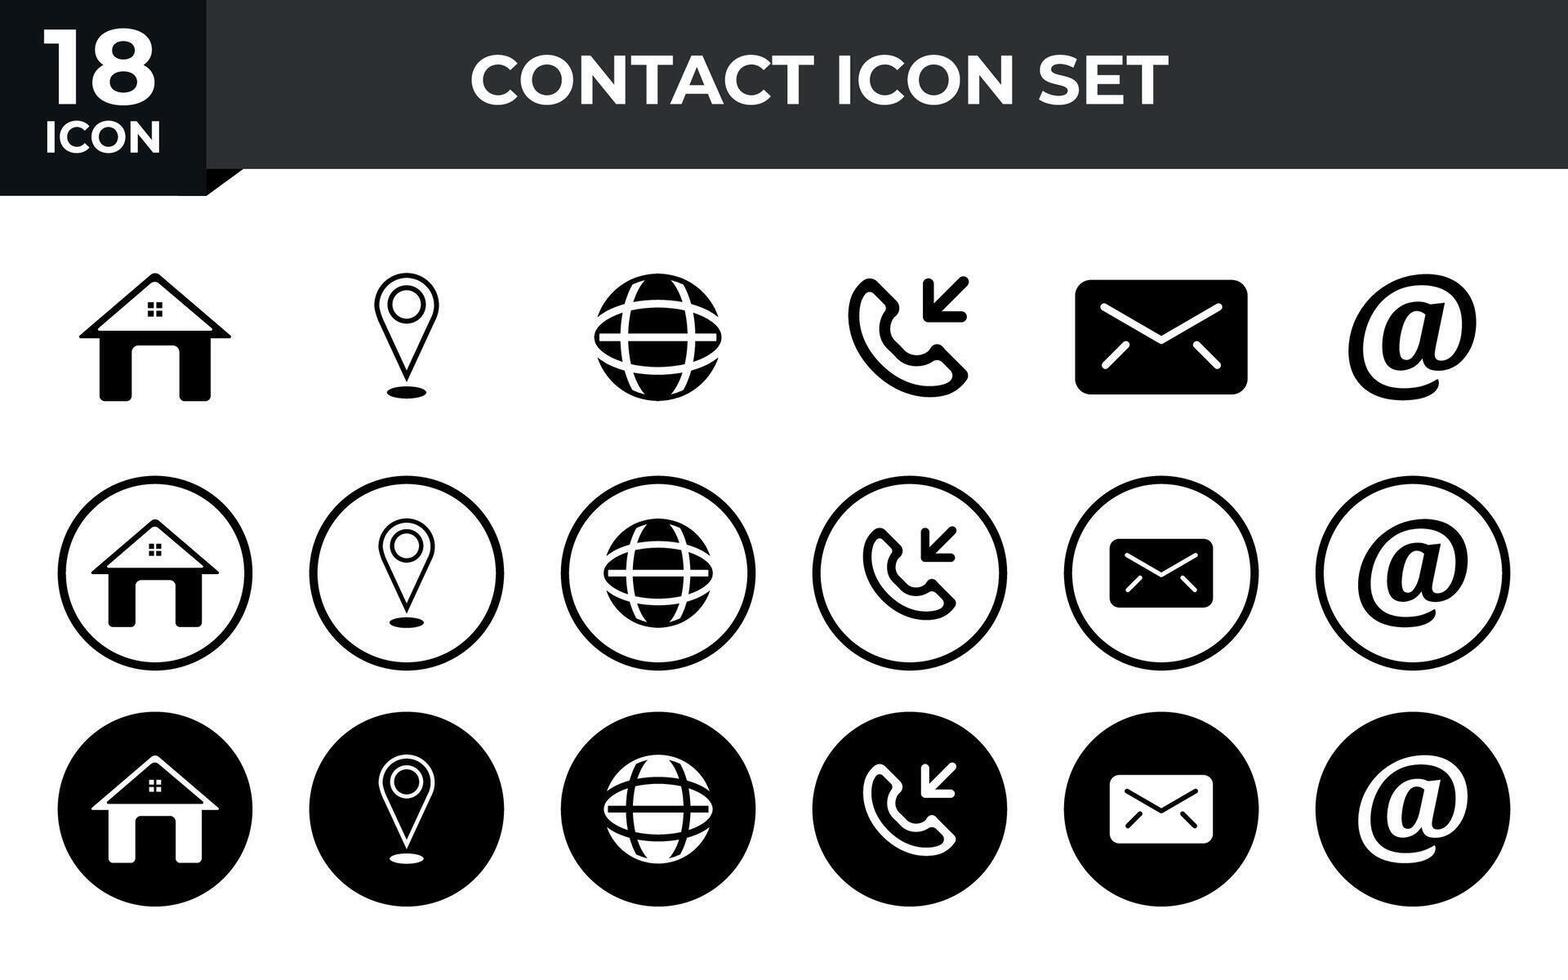 Web icon set. Business card contact information icon. Contact us icon set vector